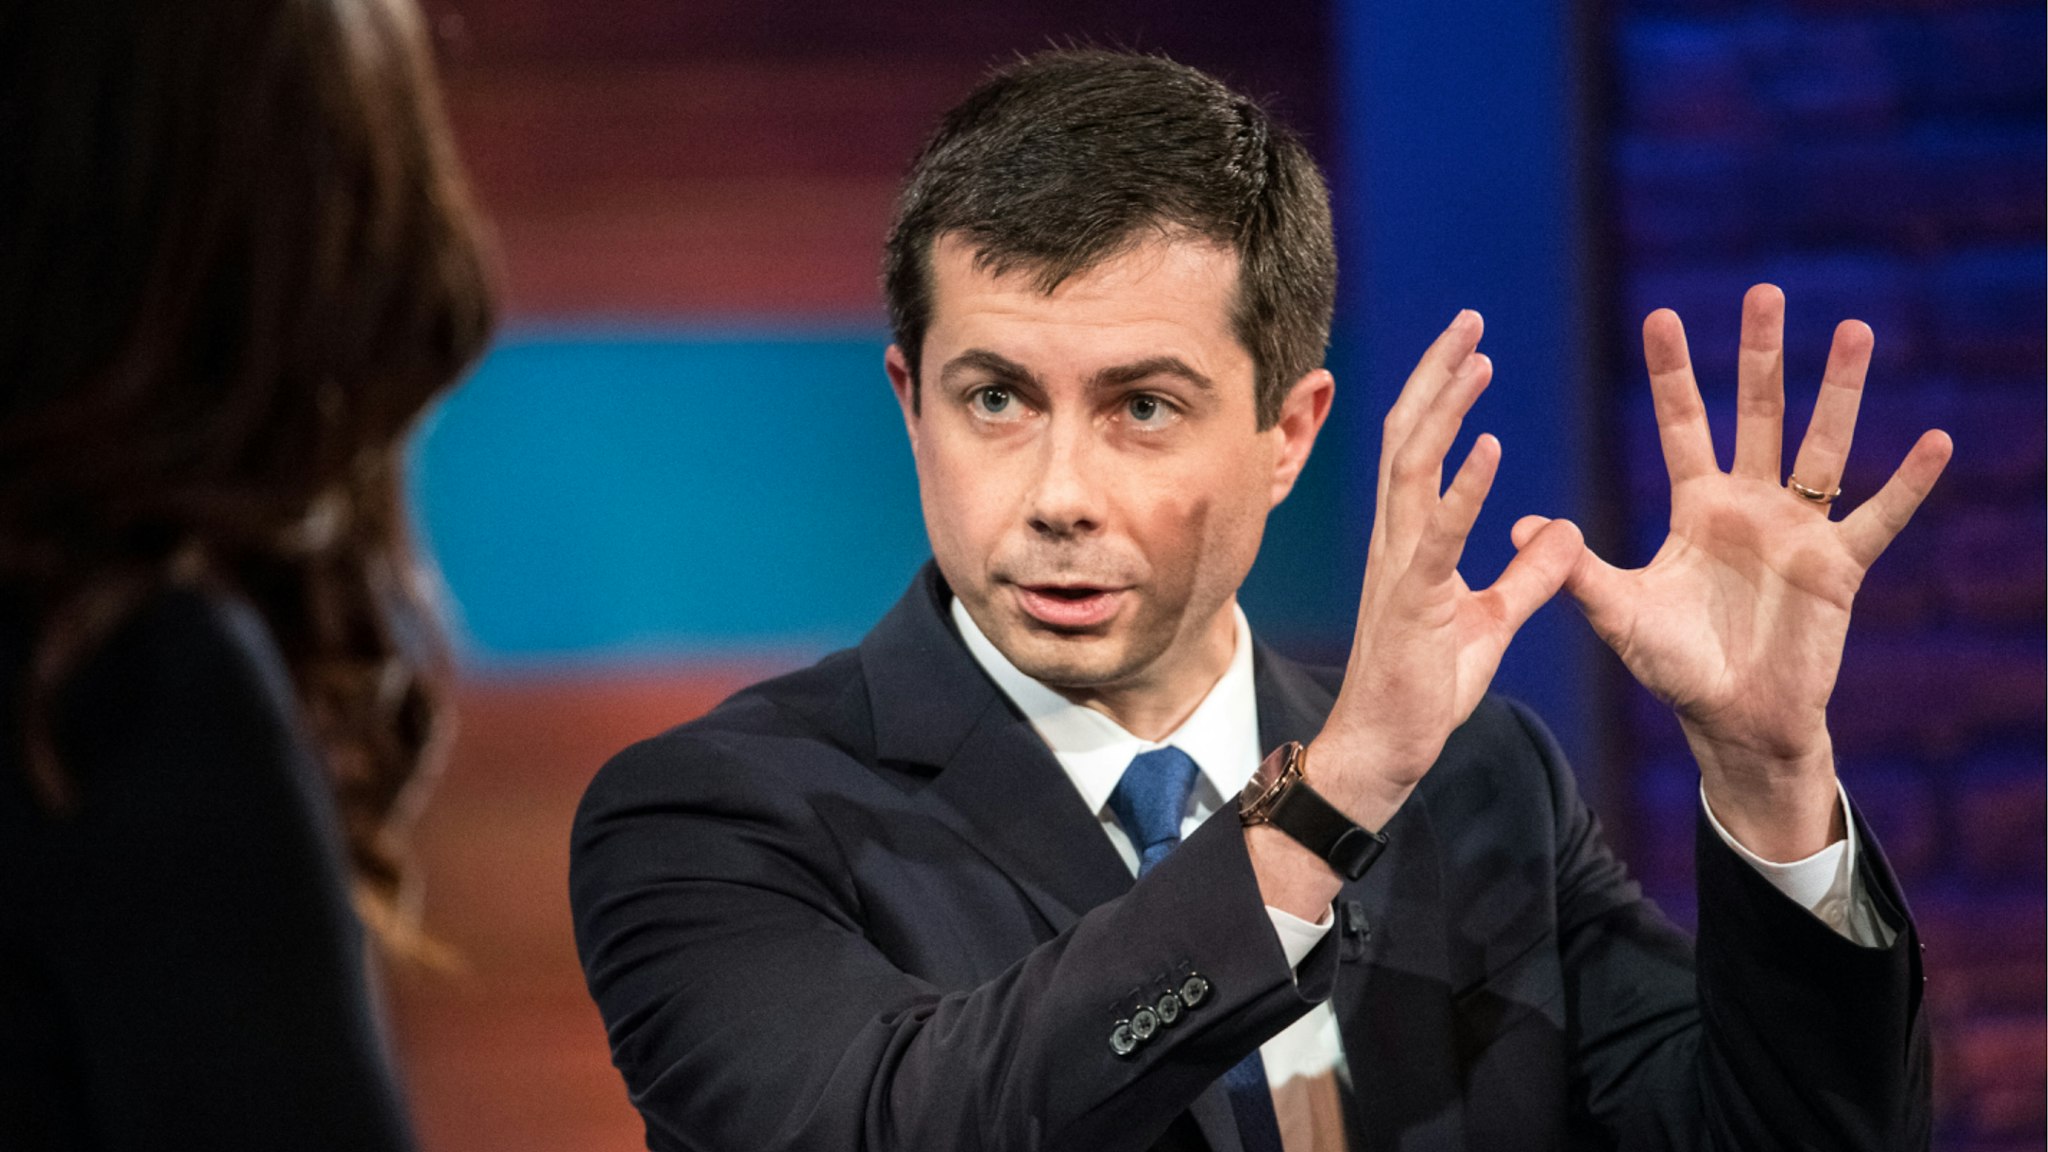 Democratic presidential candidate South Bend Mayor Pete Buttigieg participates in the Black Economic Alliance Forum at the Charleston Music Hall on June 15, 2019 in Charleston, South Carolina.